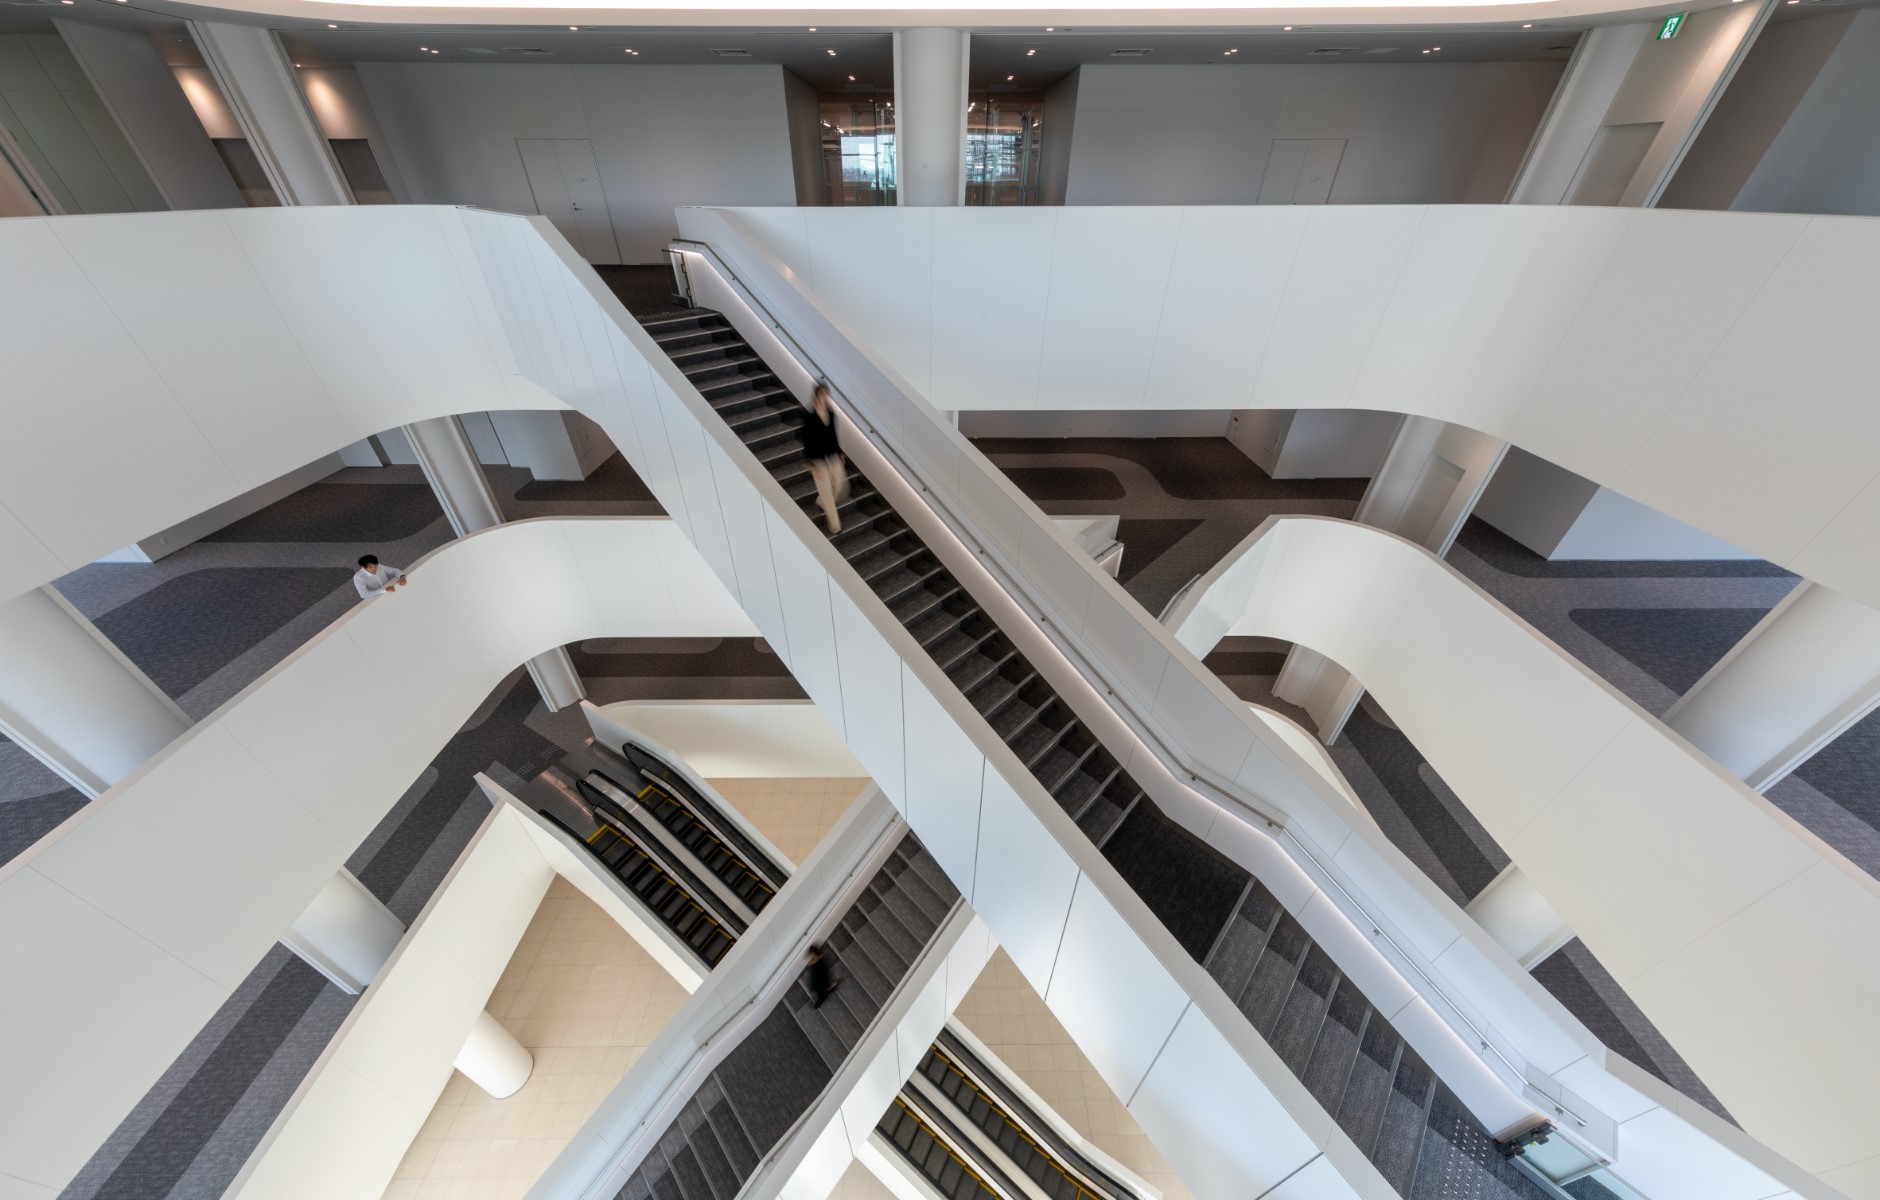 Escalators and stairways criss-cross the atrium, beckoning the visitor inward for an aesthetic journey.